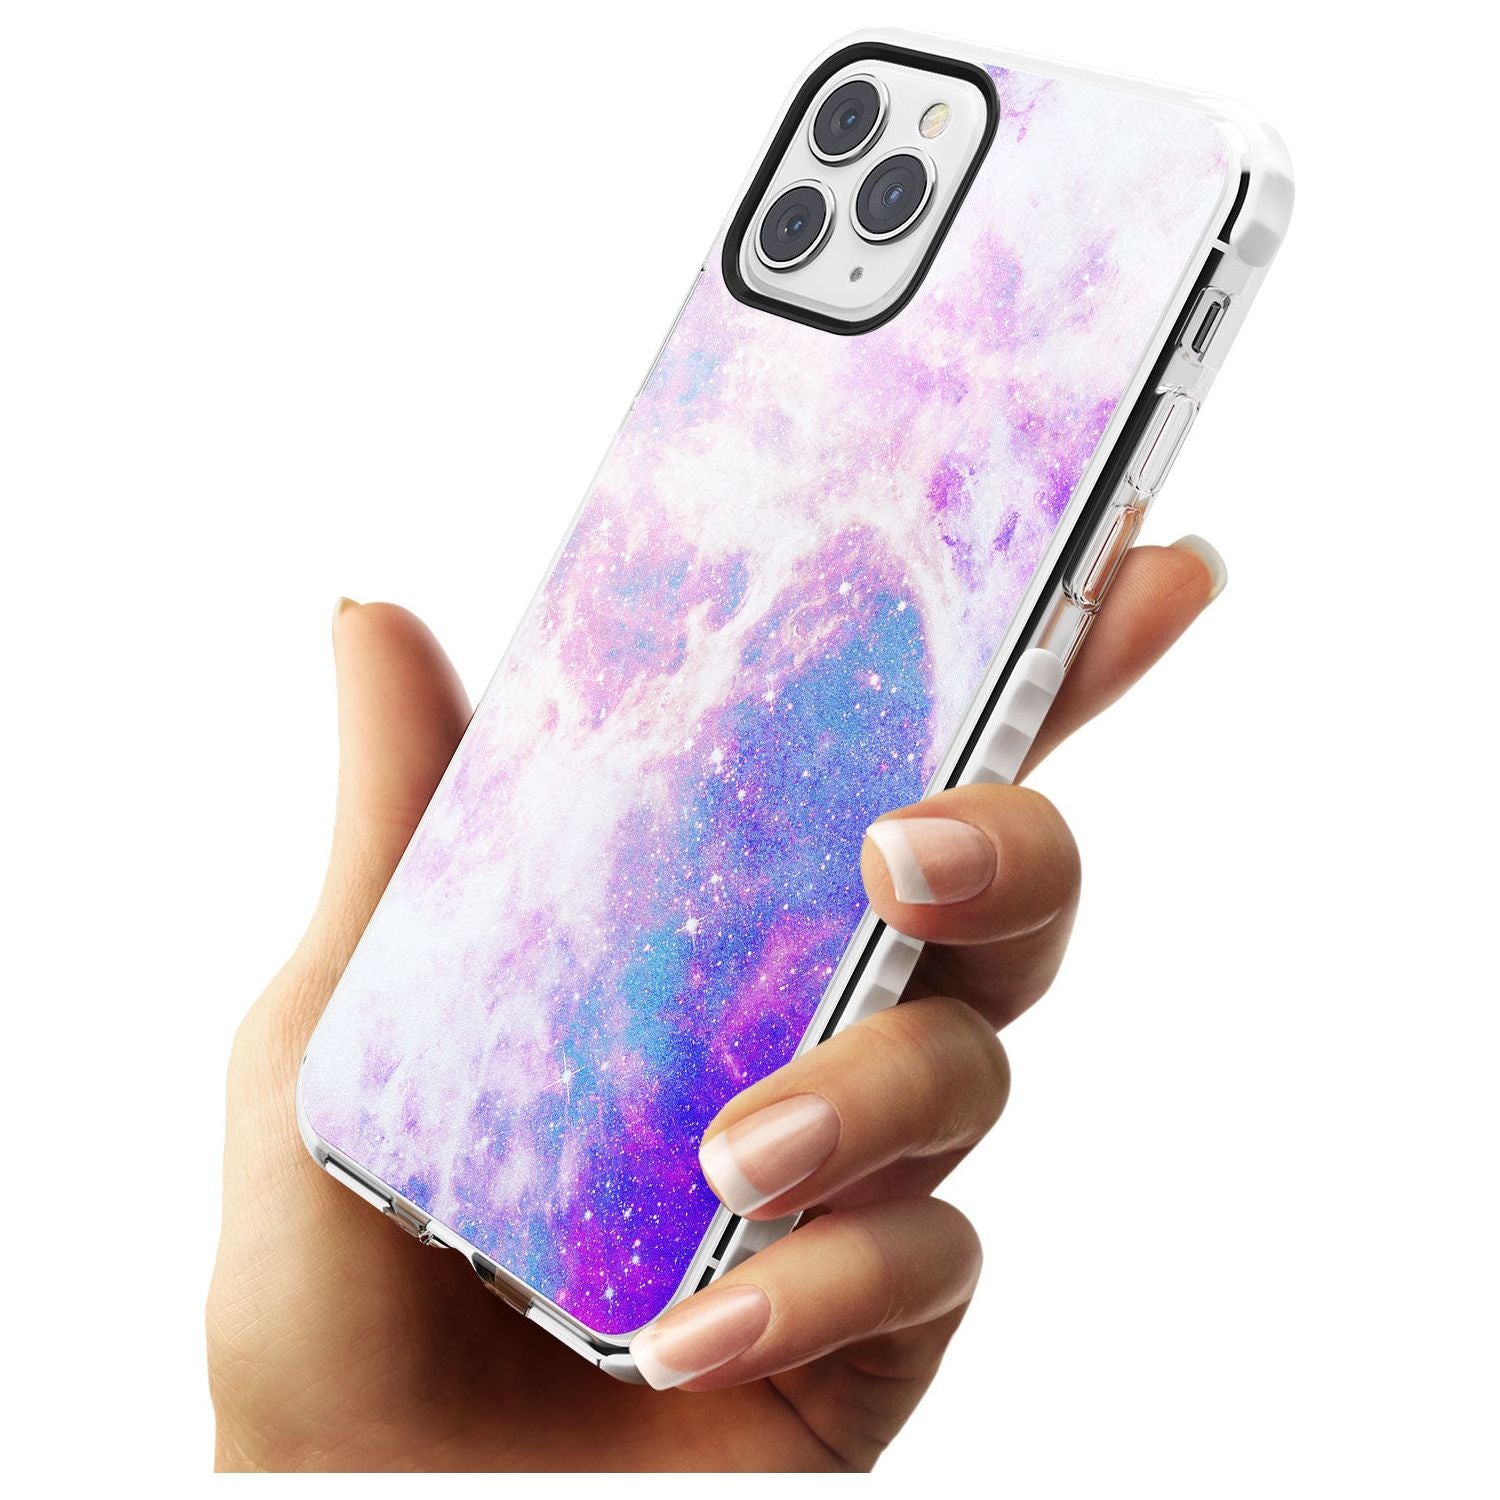 Purple & Blue Galaxy Pattern Design Impact Phone Case for iPhone 11 Pro Max